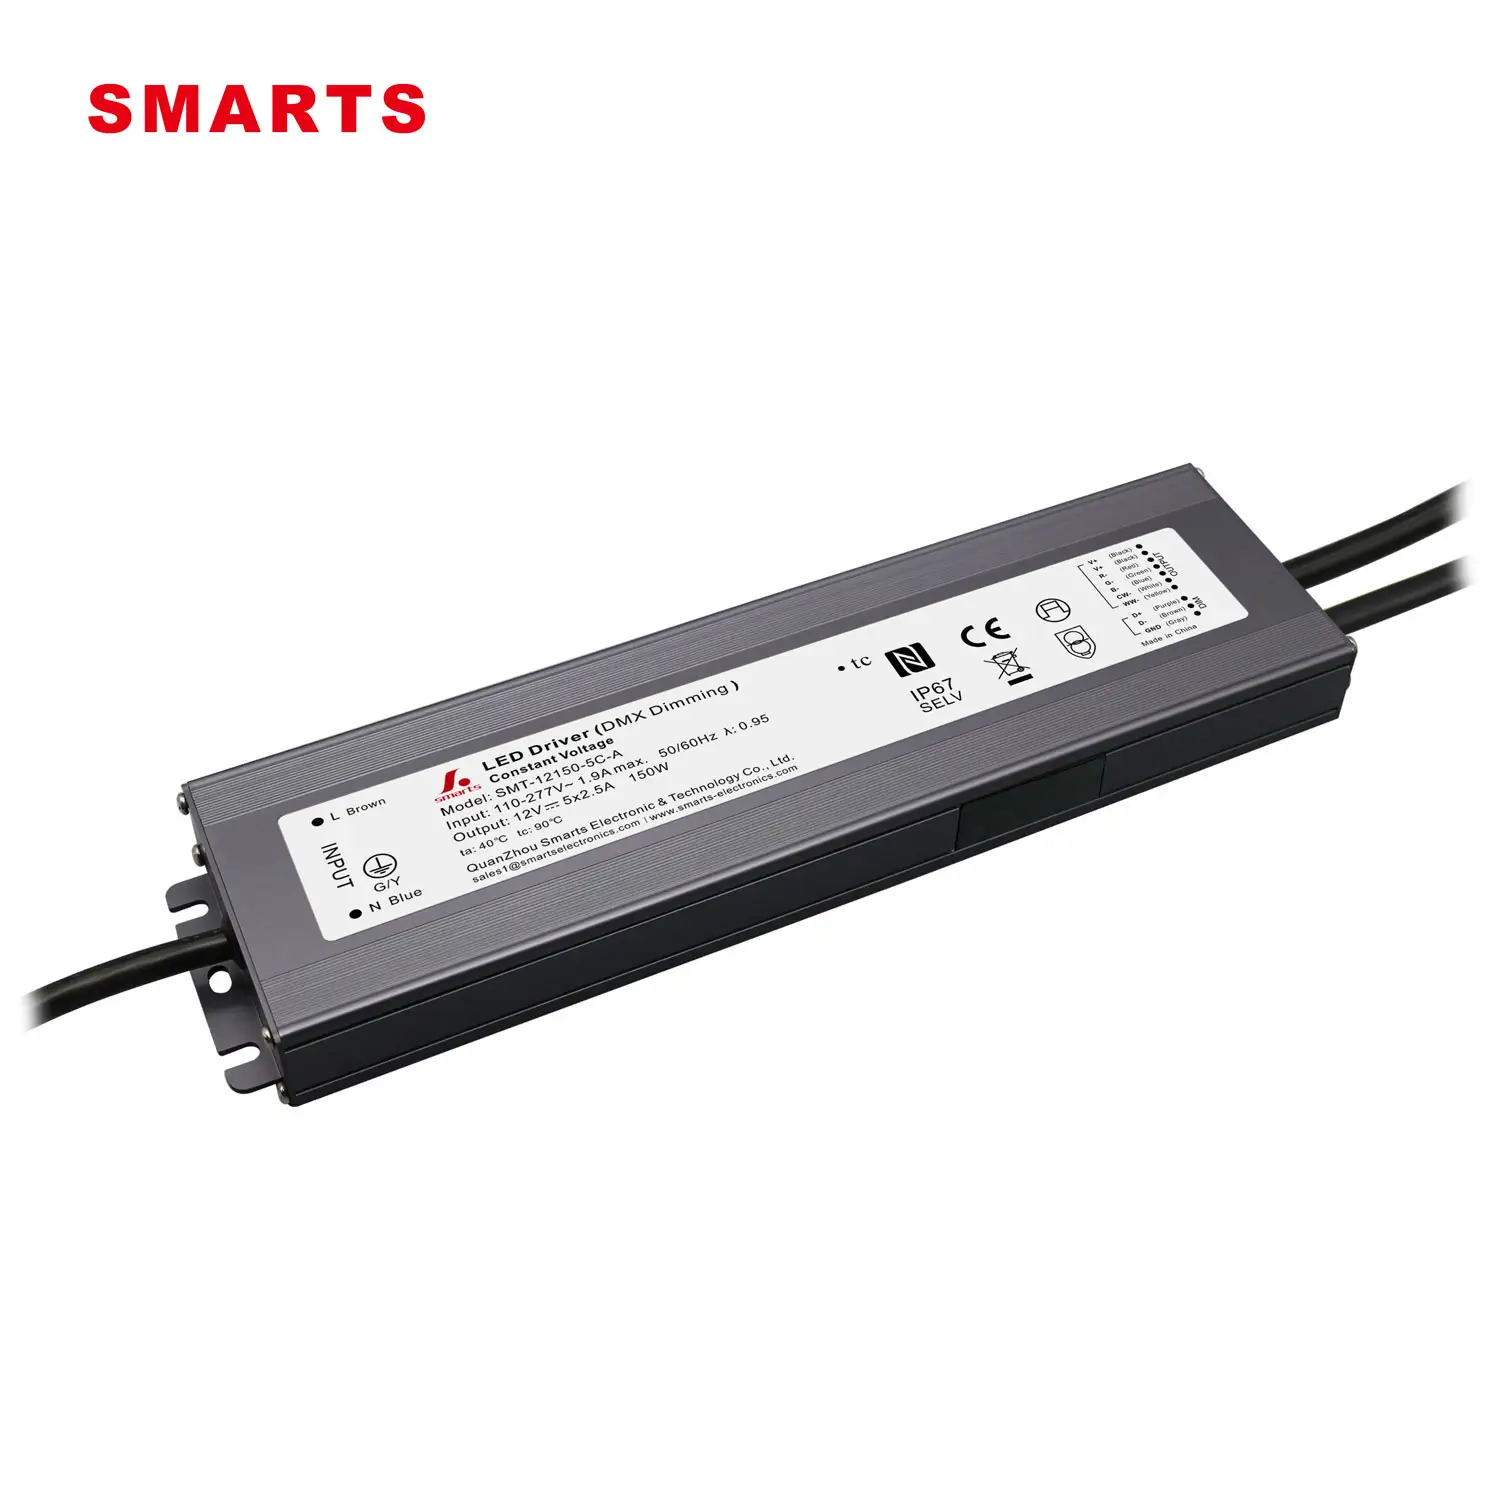 Smarts UL Listed Constant Voltage Wireless 12v 150W DMX512 Led Driver